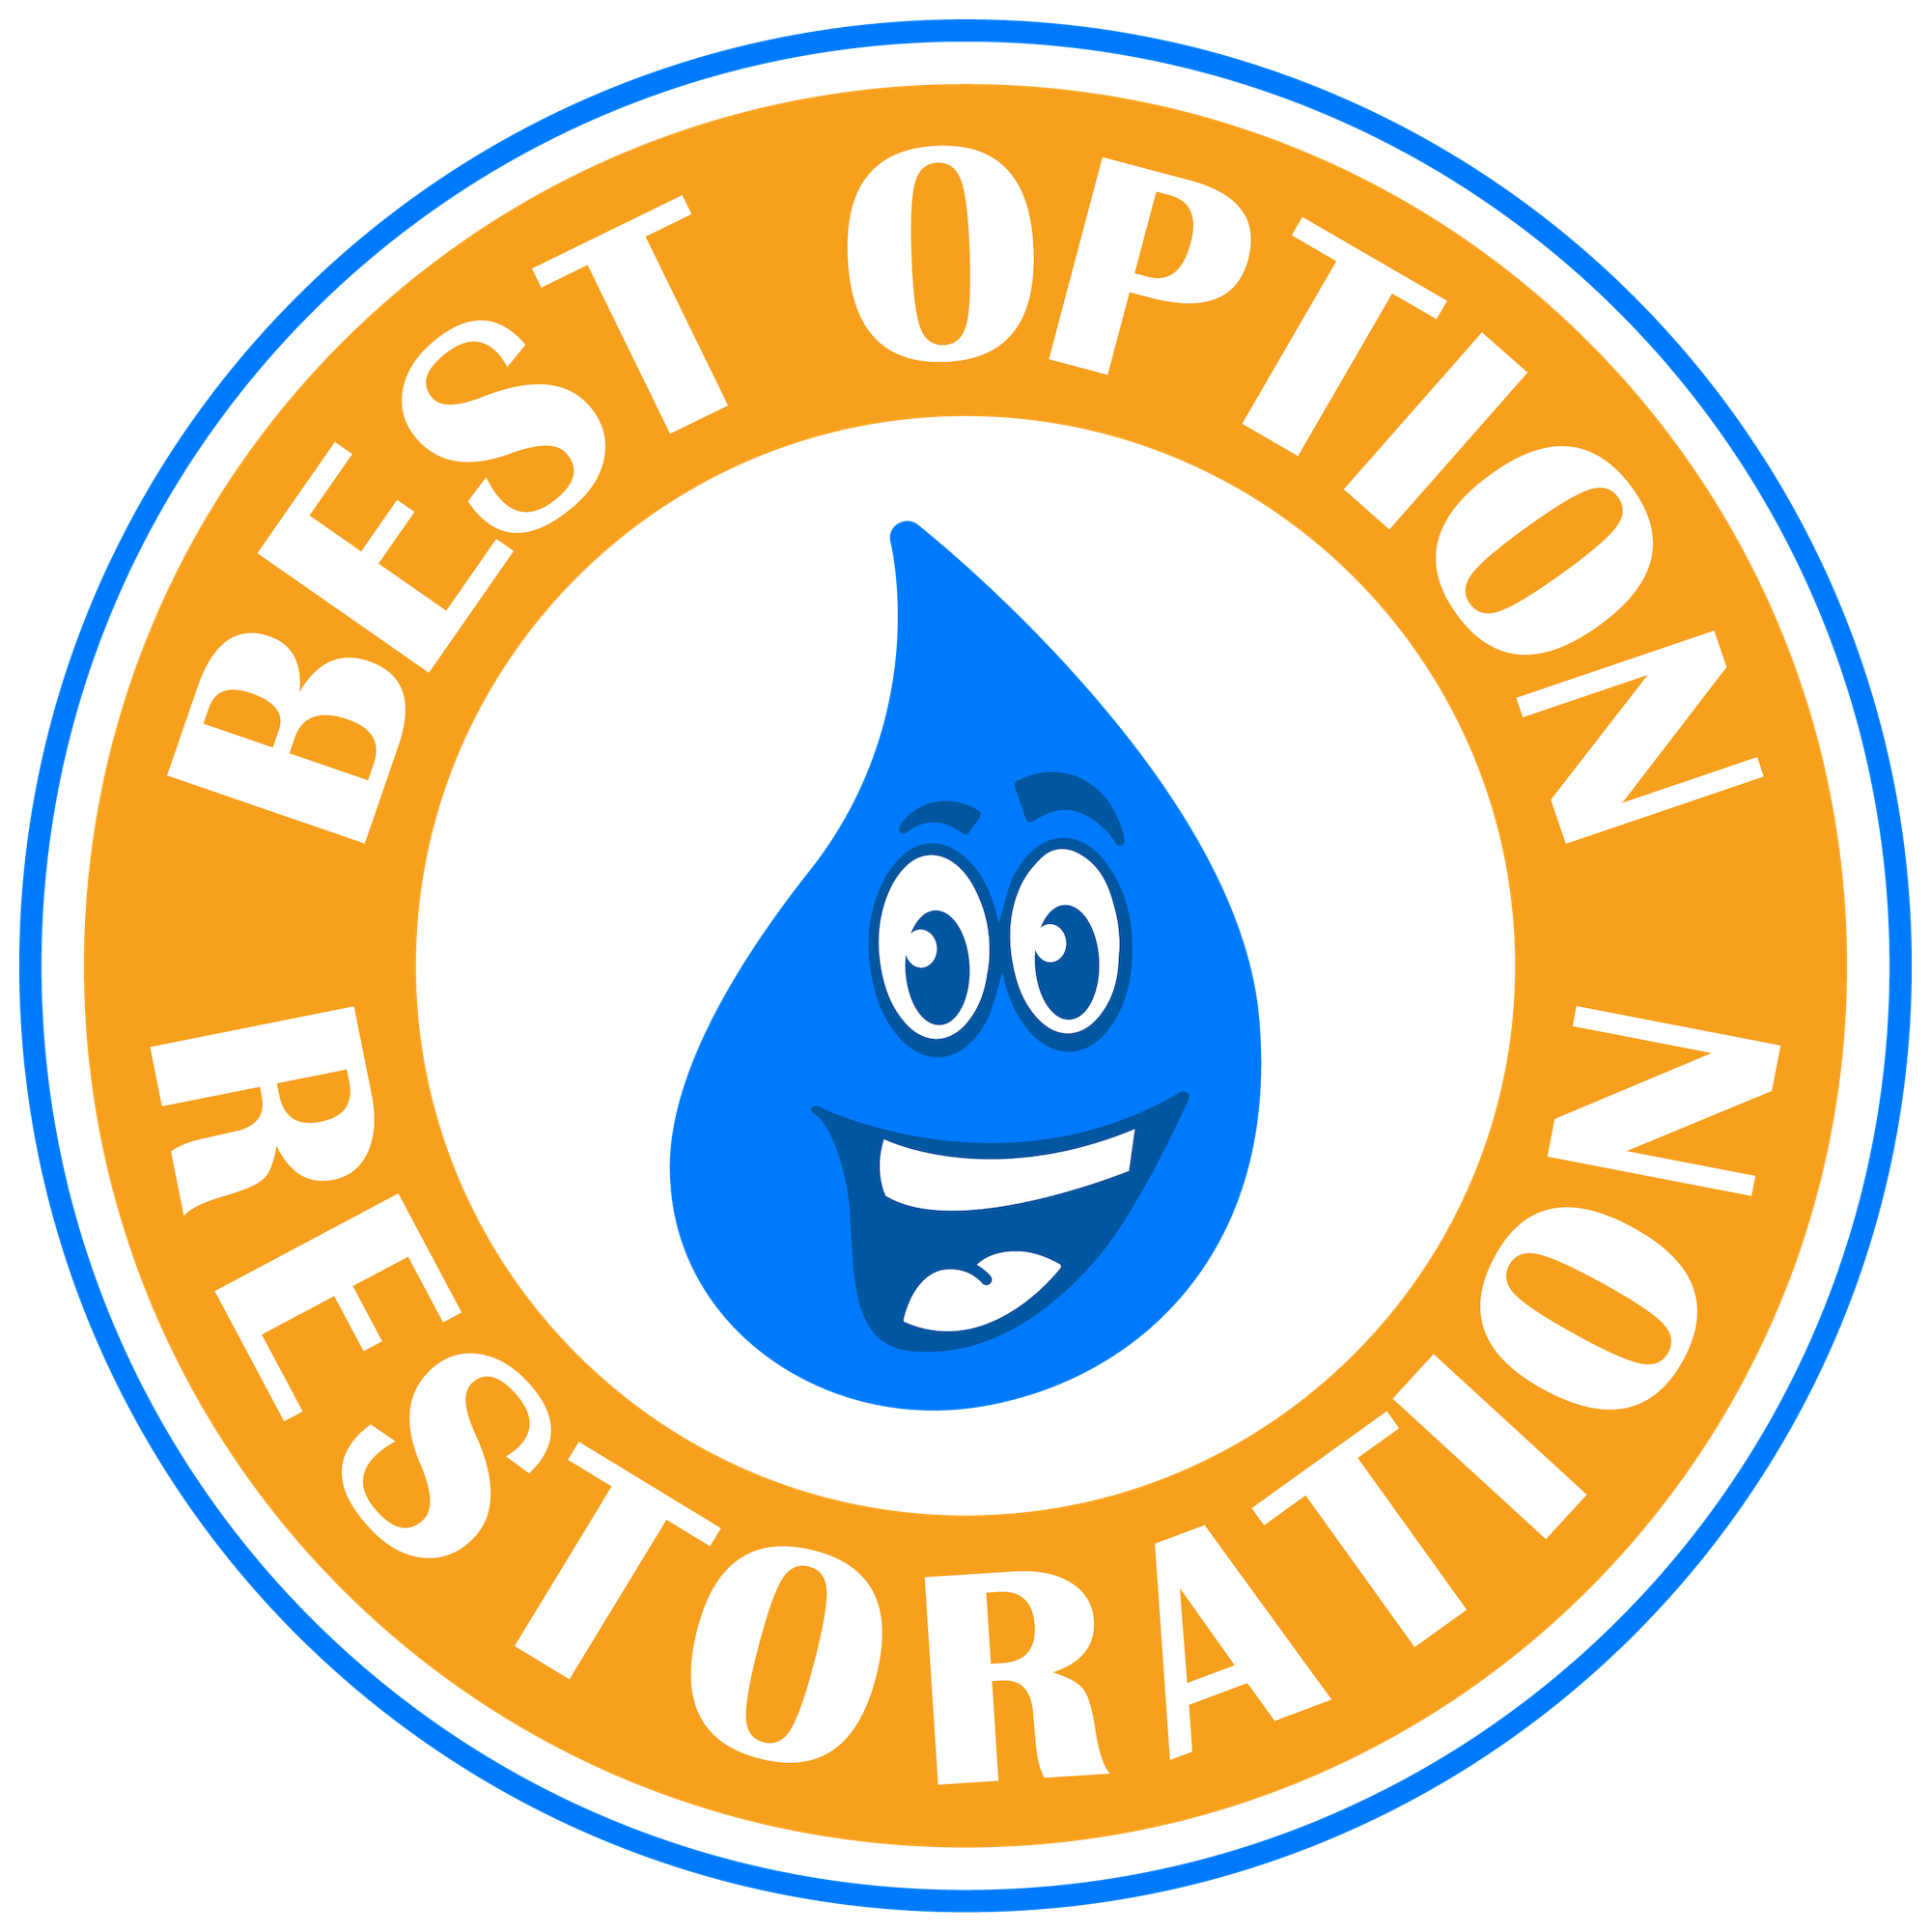 Disaster Restoration Company, Water Damage Repair Service in Plano,Texas